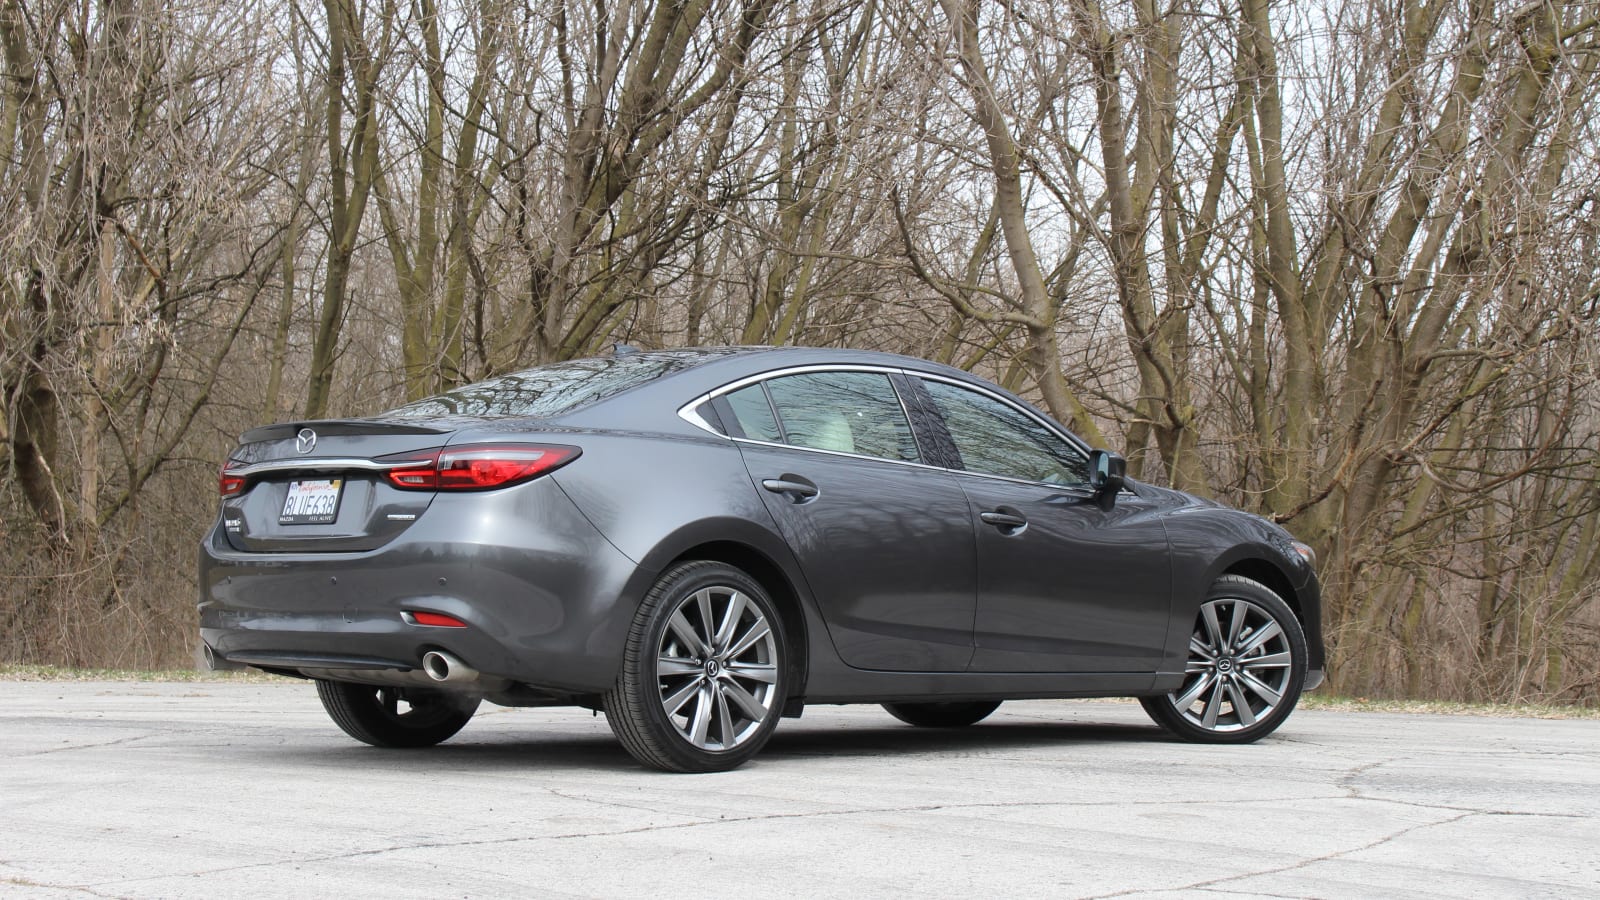 Mazda 2: Footprint Is Small, but Chassis Is Classy - The New York Times